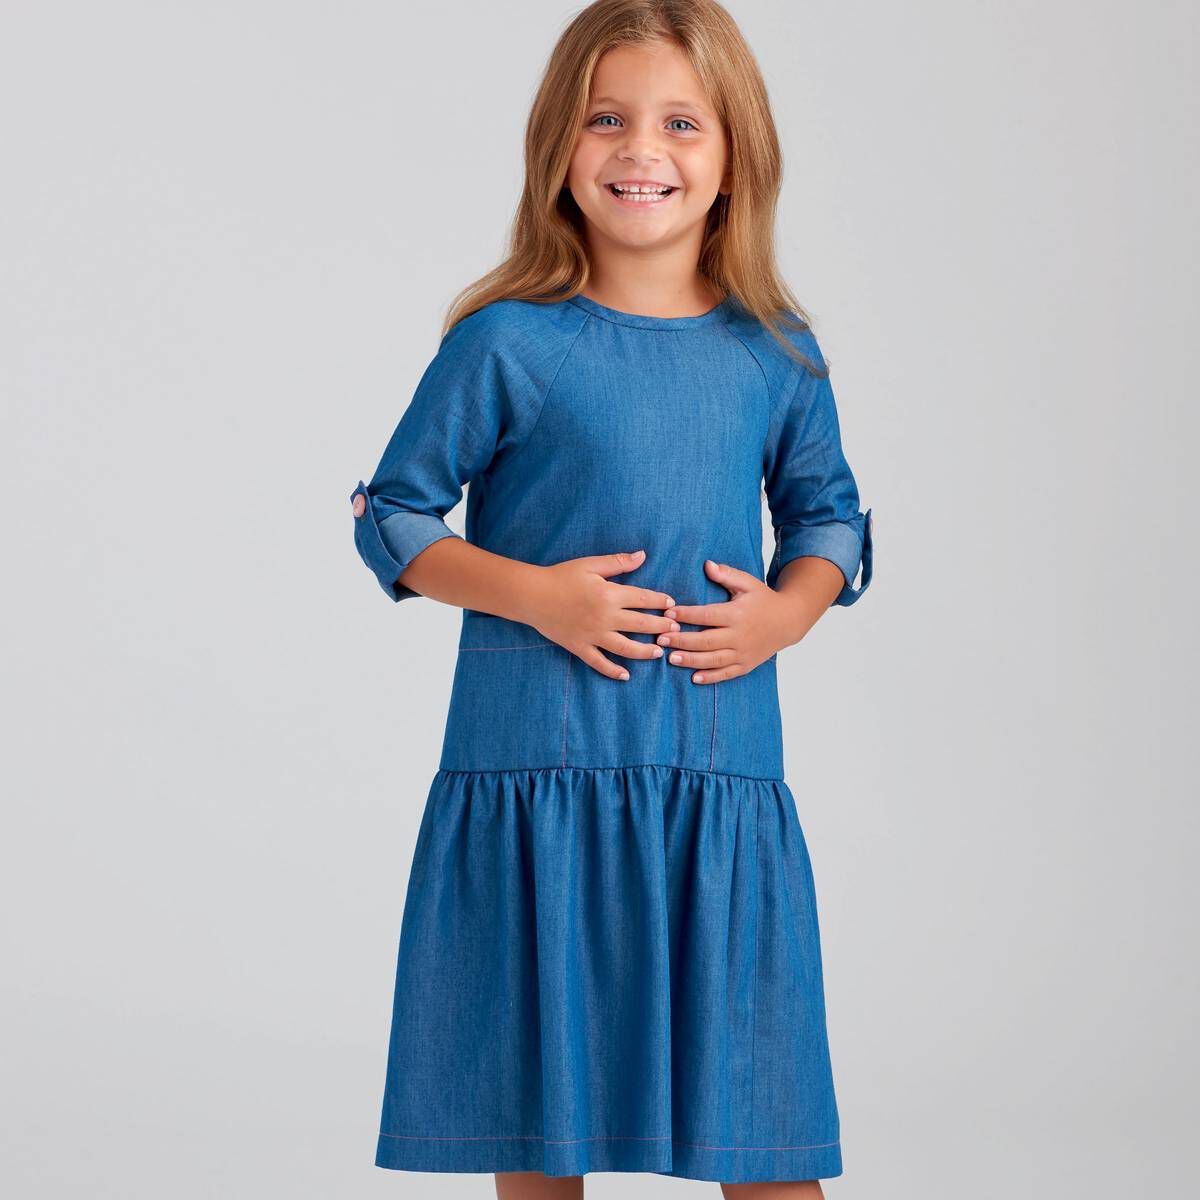 Simplicity Child and Adult Dress Sewing Pattern S9057 | Hobbycraft